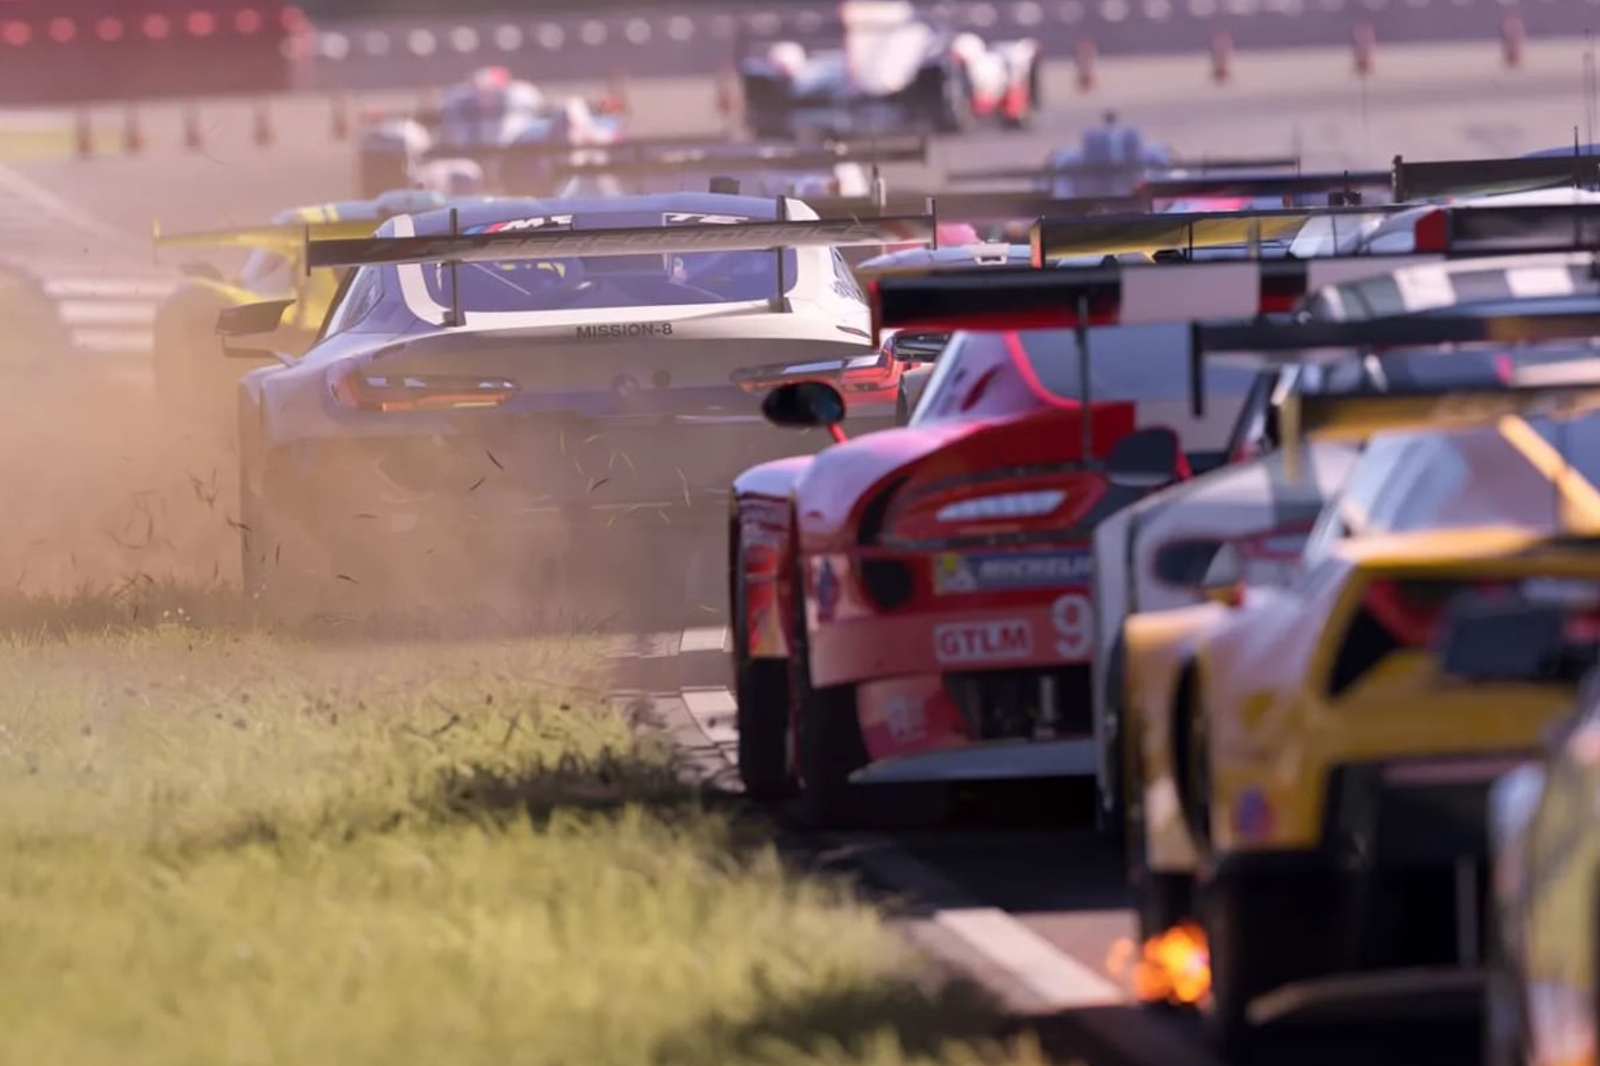 offbeat, movies & tv, forza motorsports' ai opponents could race smarter and cleaner than people